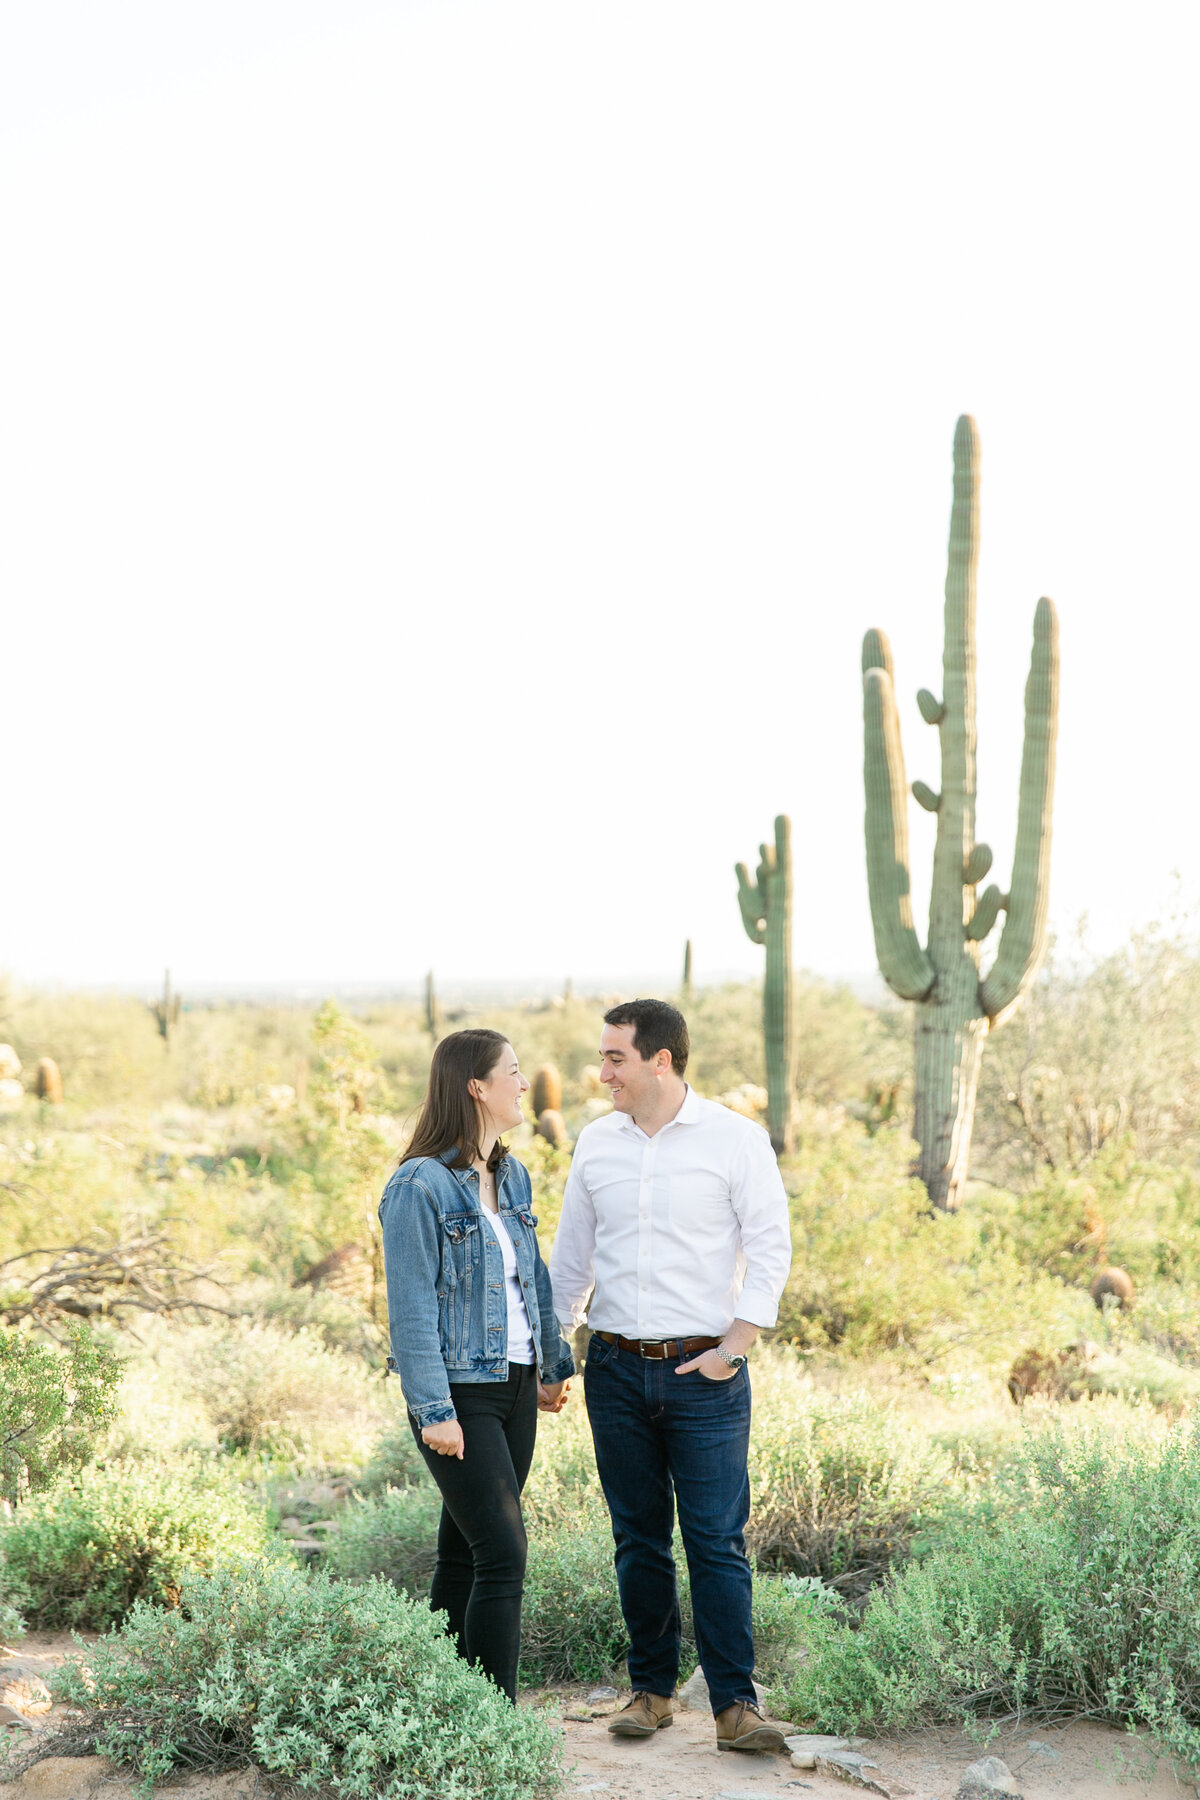 Karlie Colleen Photography - Scottsdale family photography - Victoria & family-212